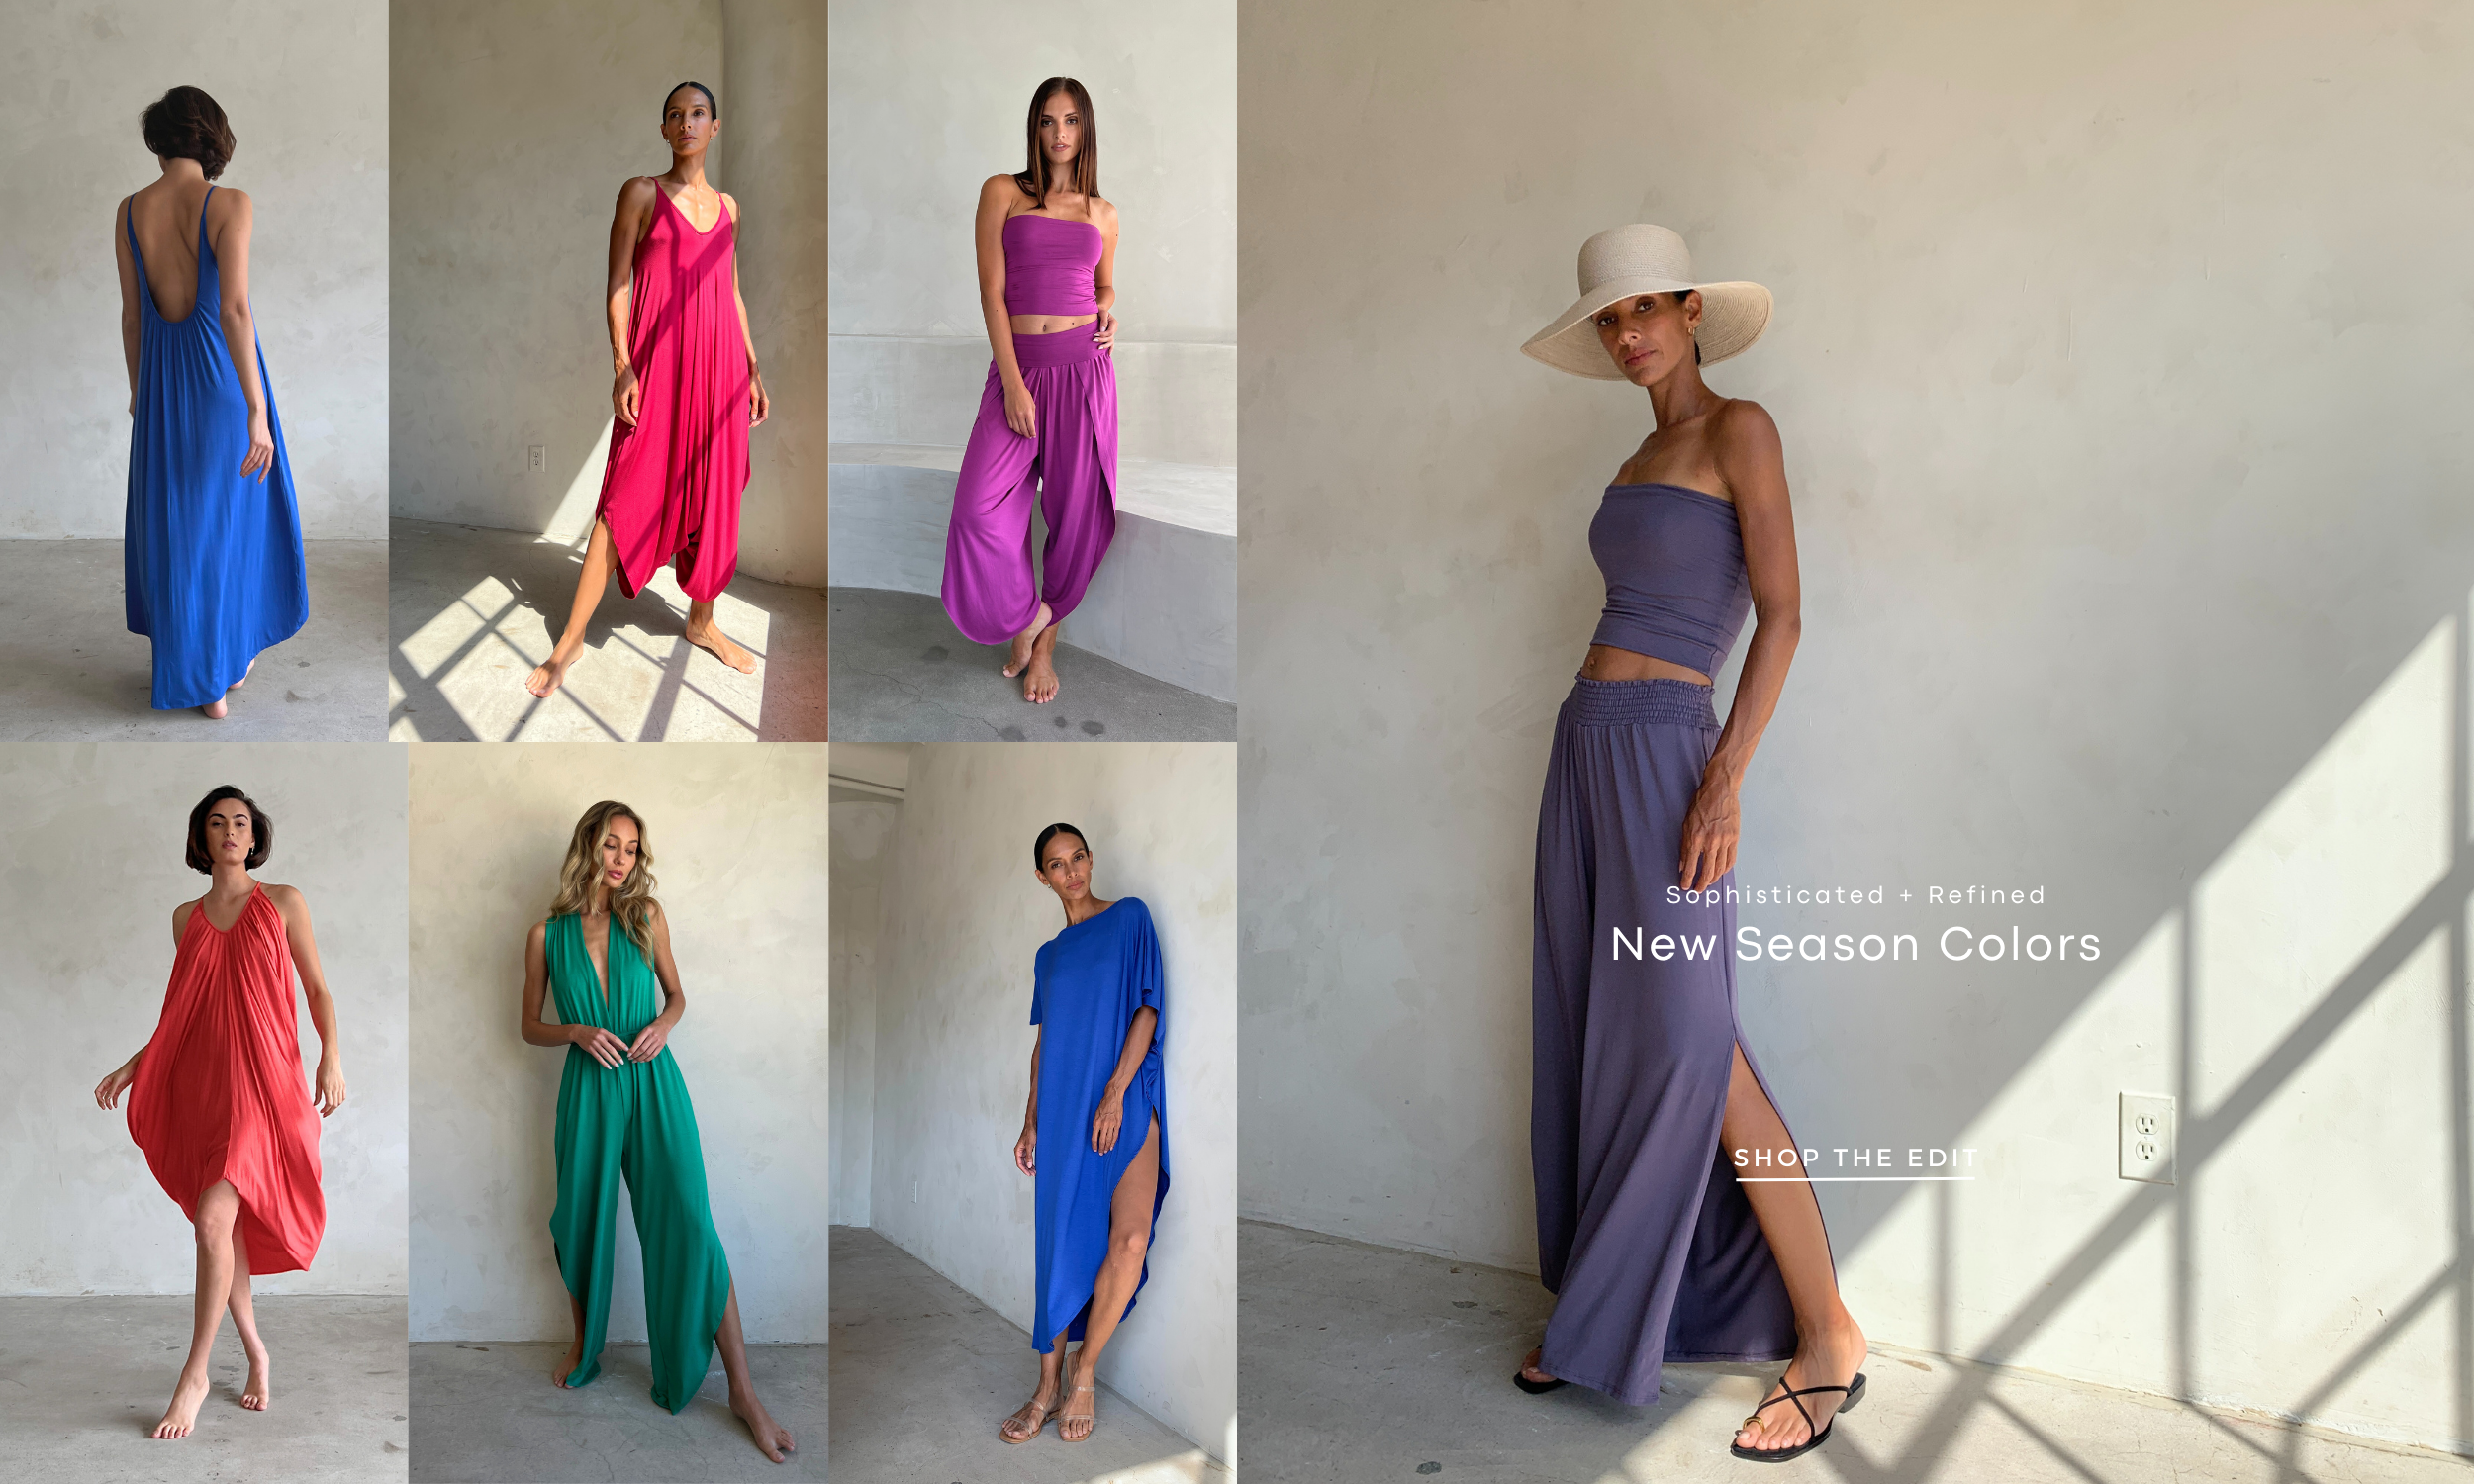 Sophisticated and refined resort wear.  New season colors.  Shop the edits